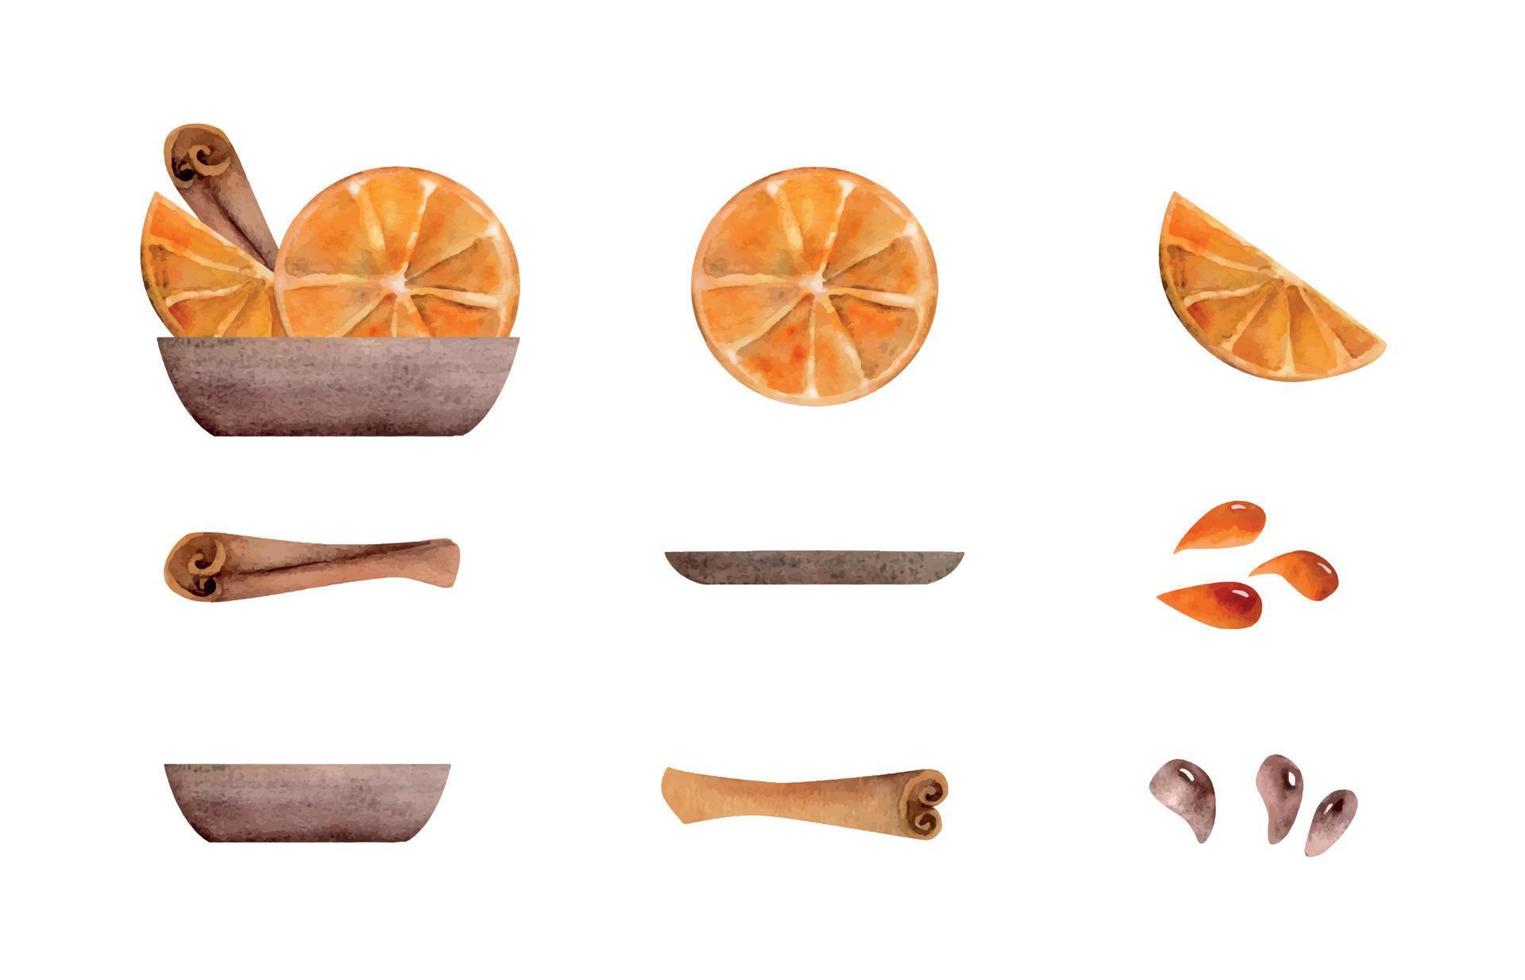 Watercolor hand drawn set of objects. Coffee drops, orange slices, juice drops, cinnamon sticks spice. Isolated on white background. For invitations, cafe, restaurant food menu, print, website, cards vector